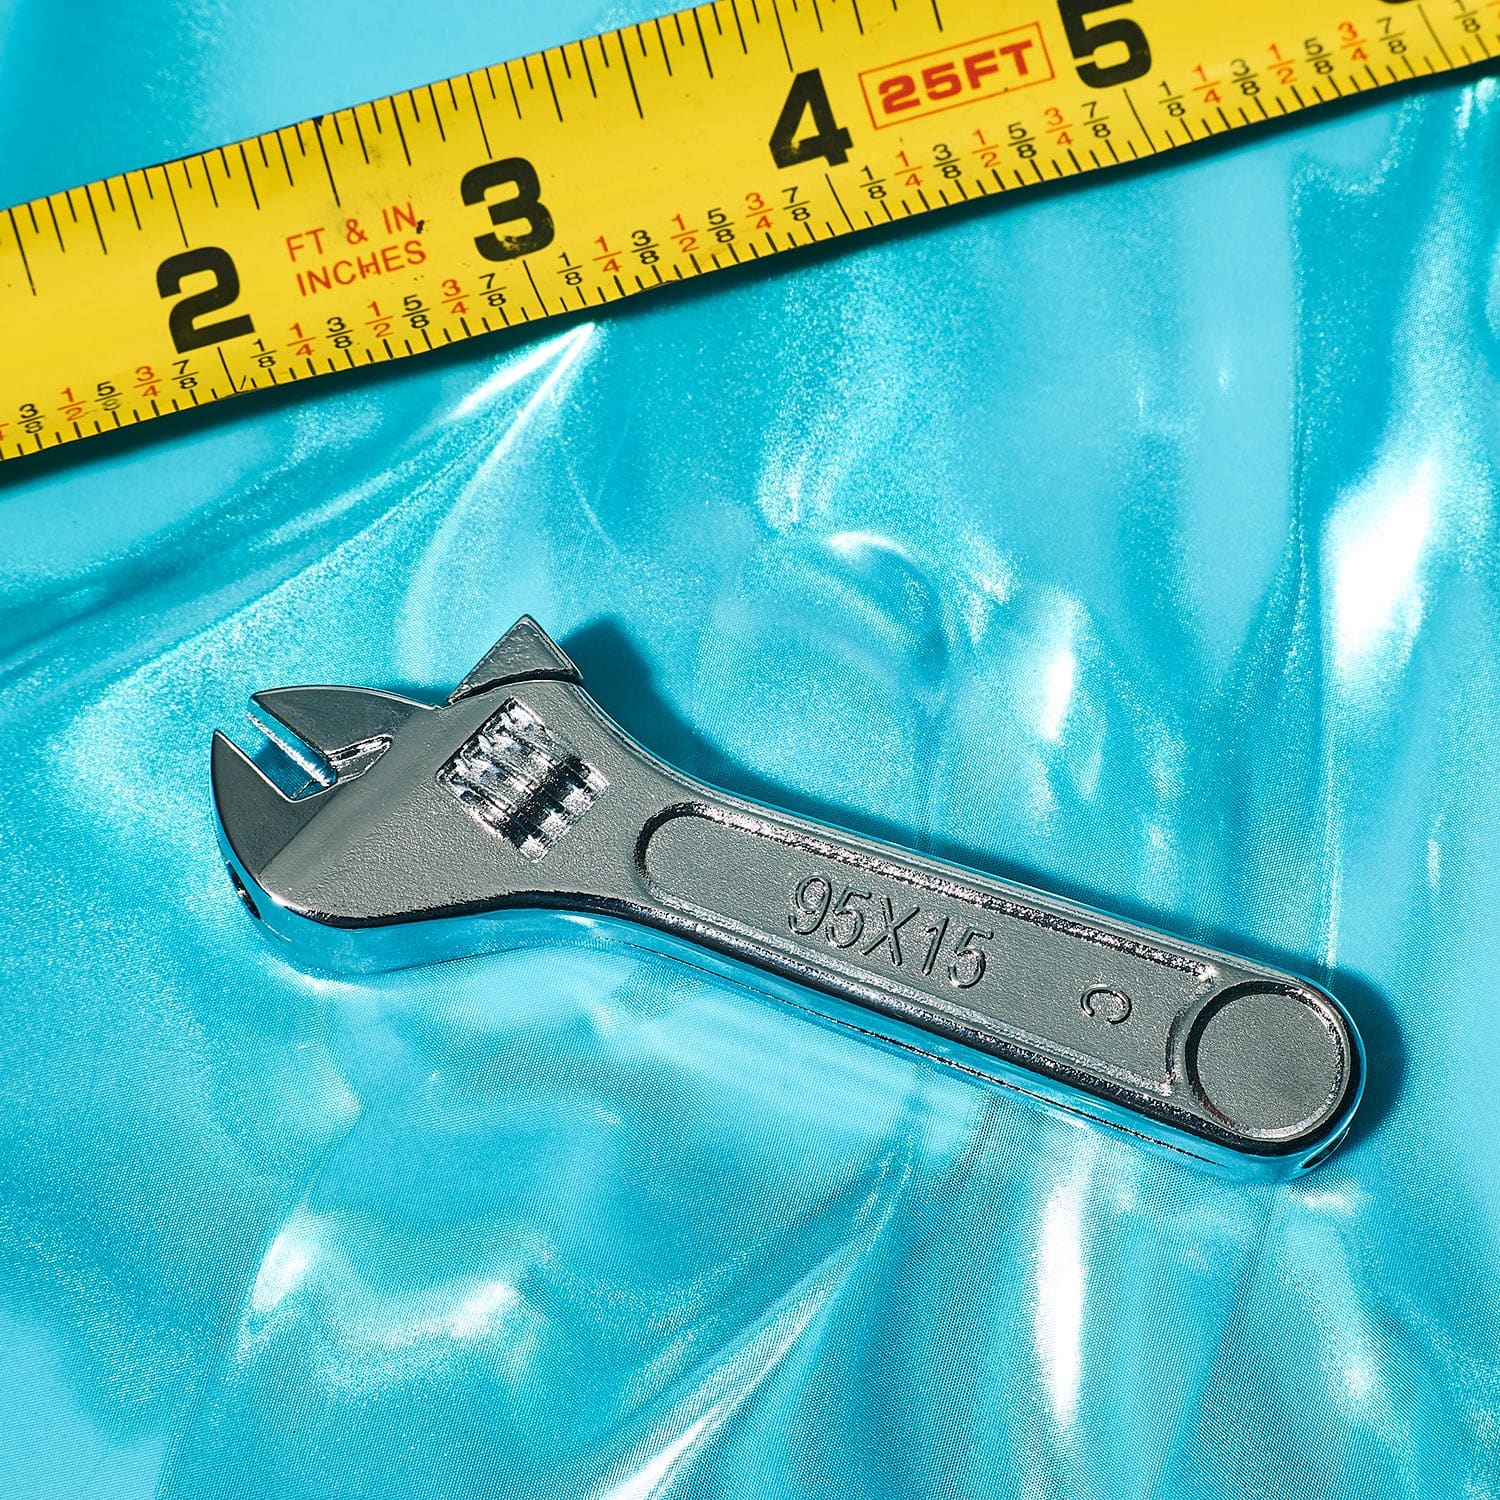 Butane Lighter Ae Wrench 0423 - Groupbycolor - Q223